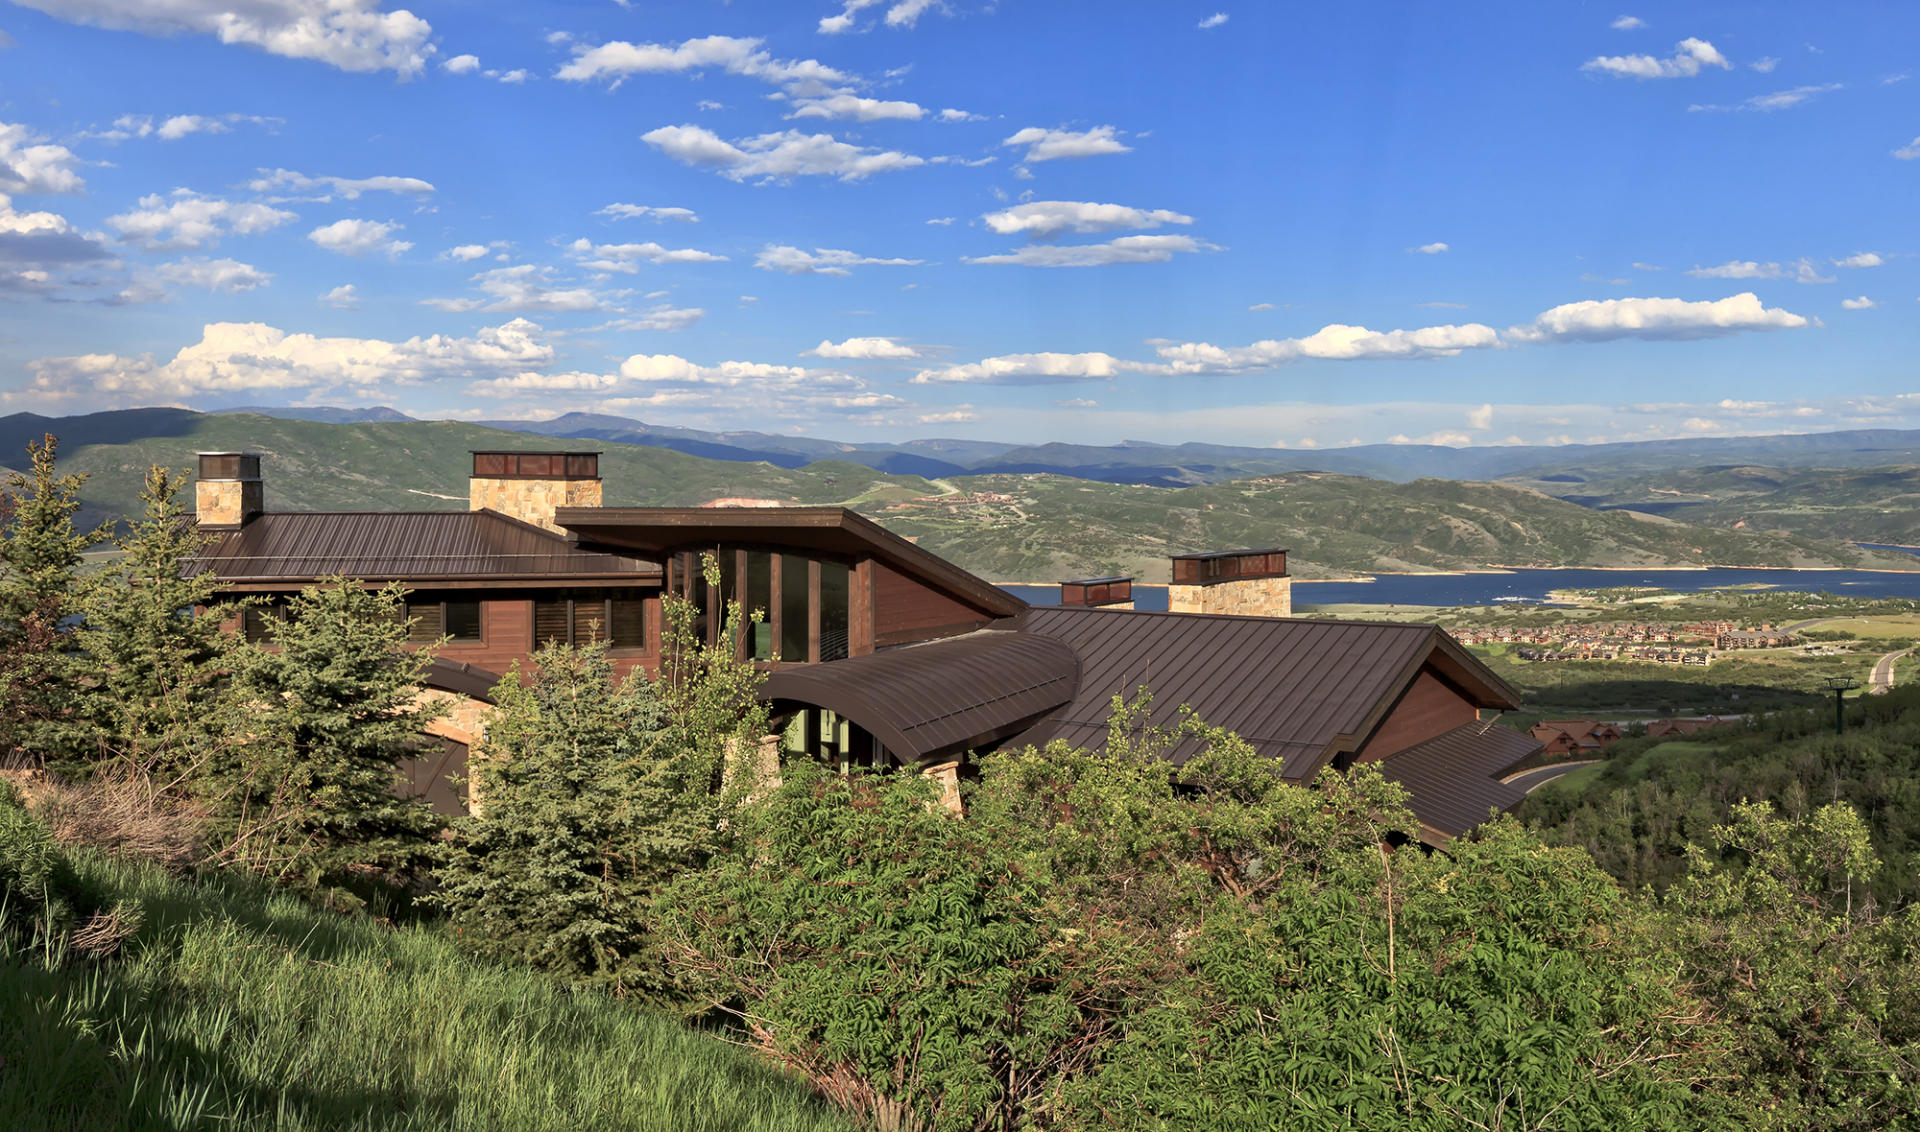 Private Residence ... Park City, UT : Residential . Private . Development : Architectural Photography | David Miller | David R. Miller | Photography | American | Architectural | Architects | Construction | Contractors | Nationwide | Landscape | Designers | Goggle | Revolutionary War | Fine Art | Stock